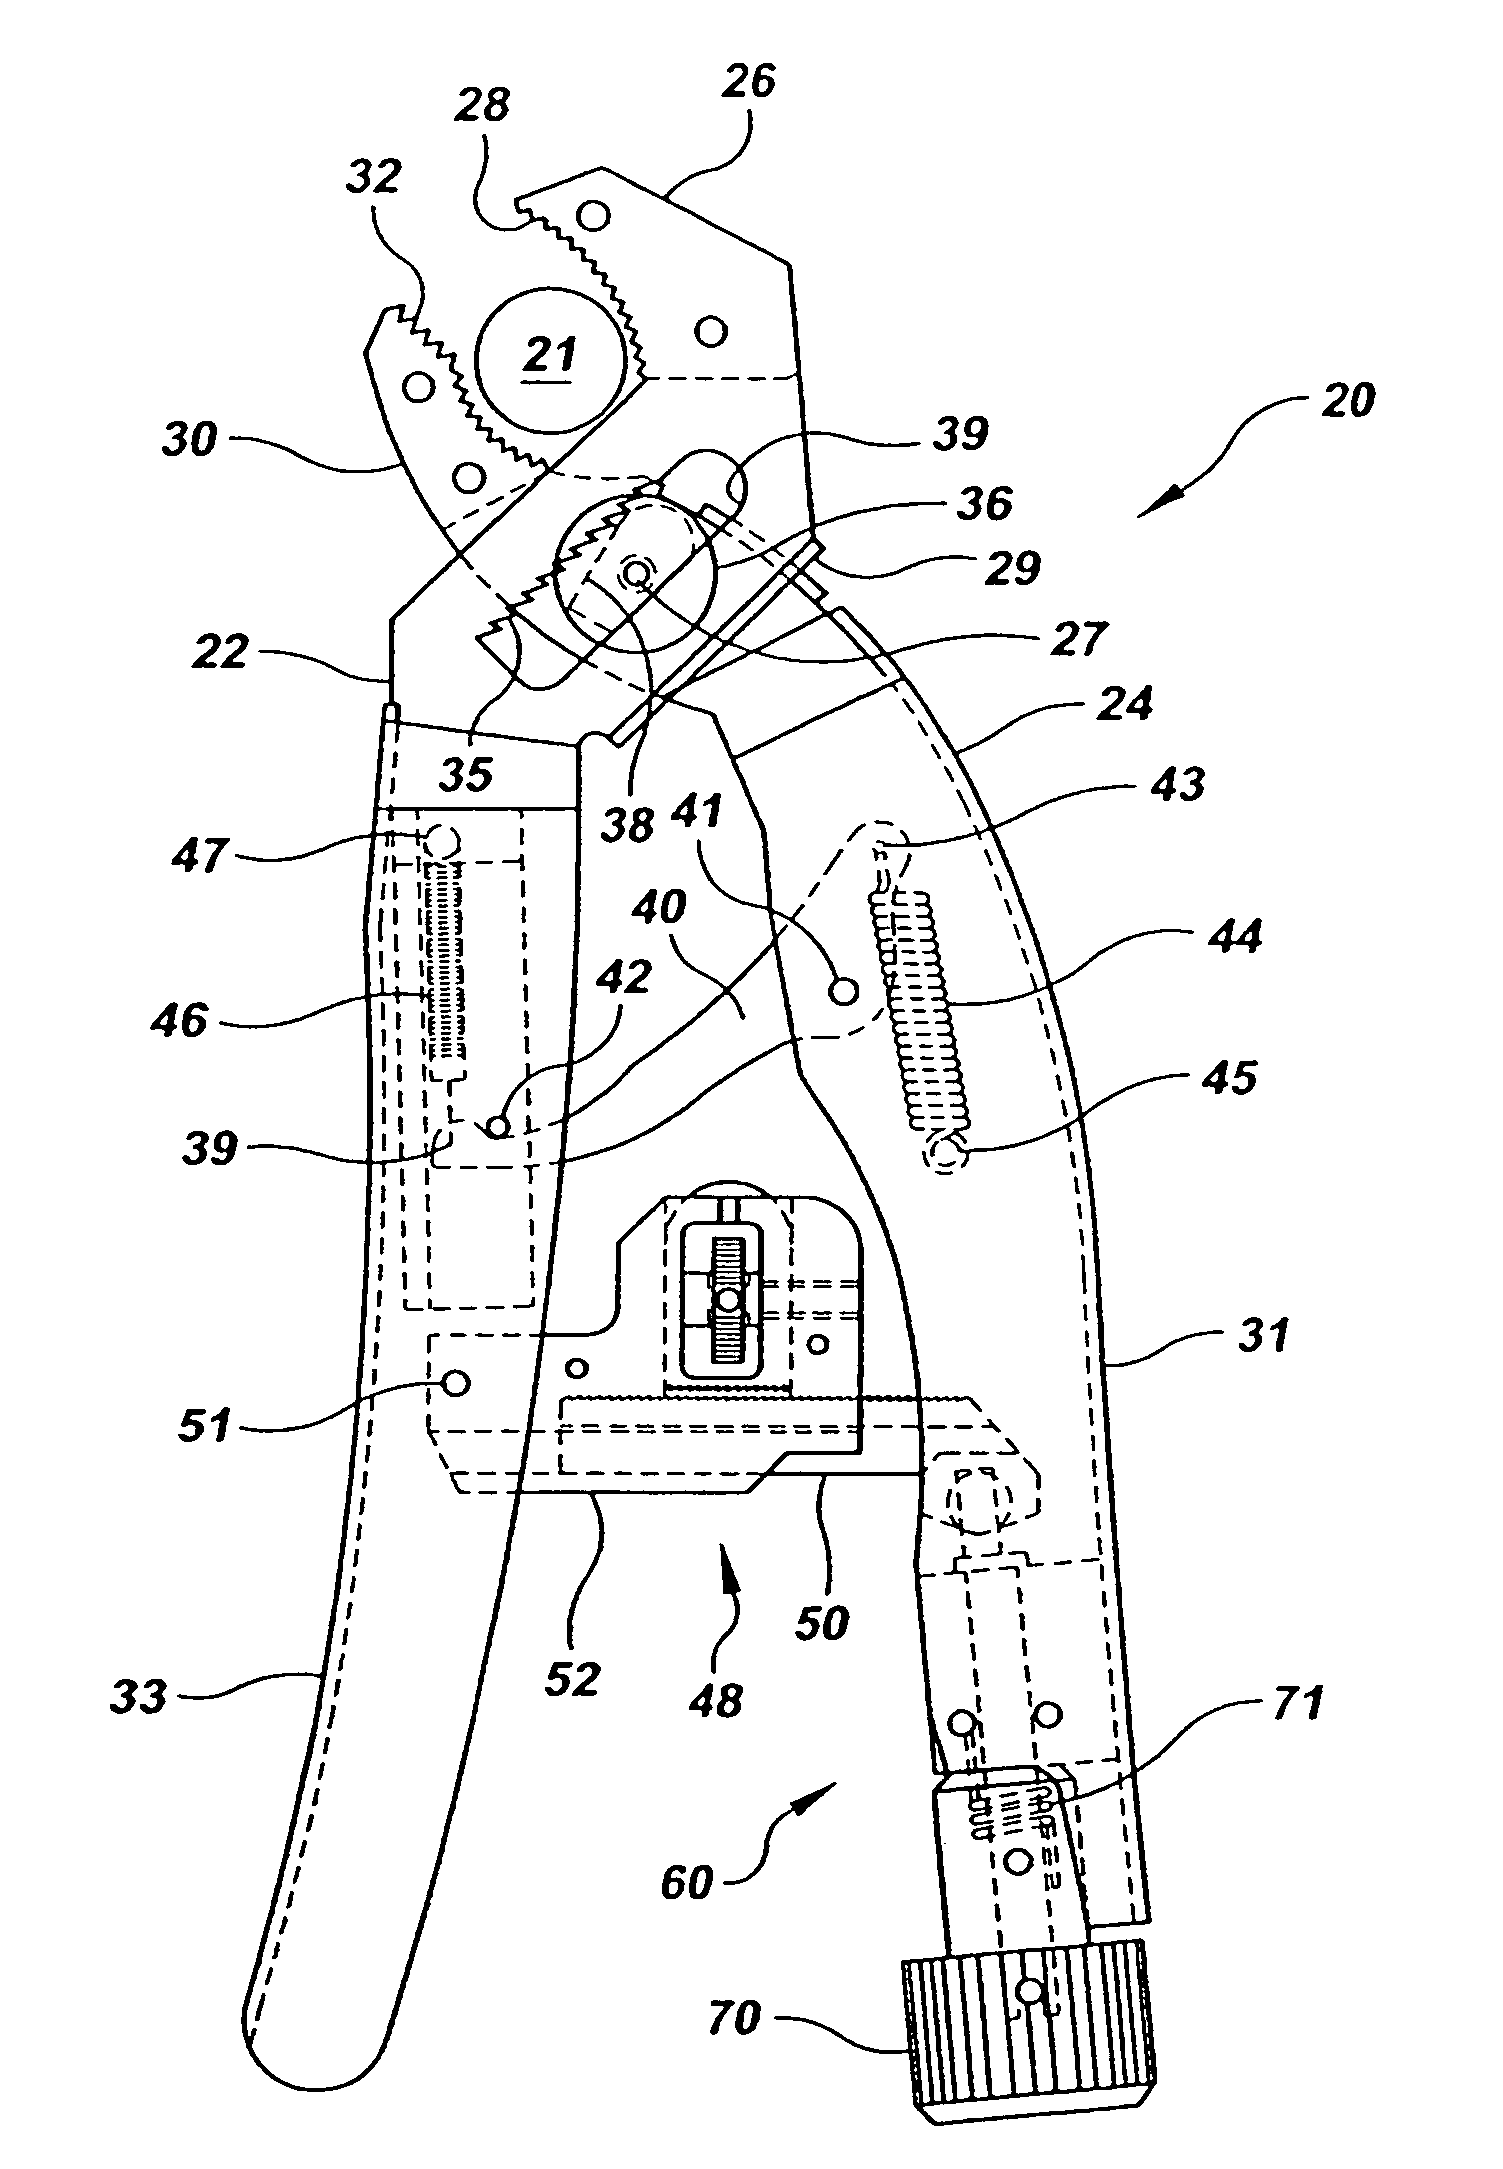 Self-adjusting, locking pliers with gripping force adjustment